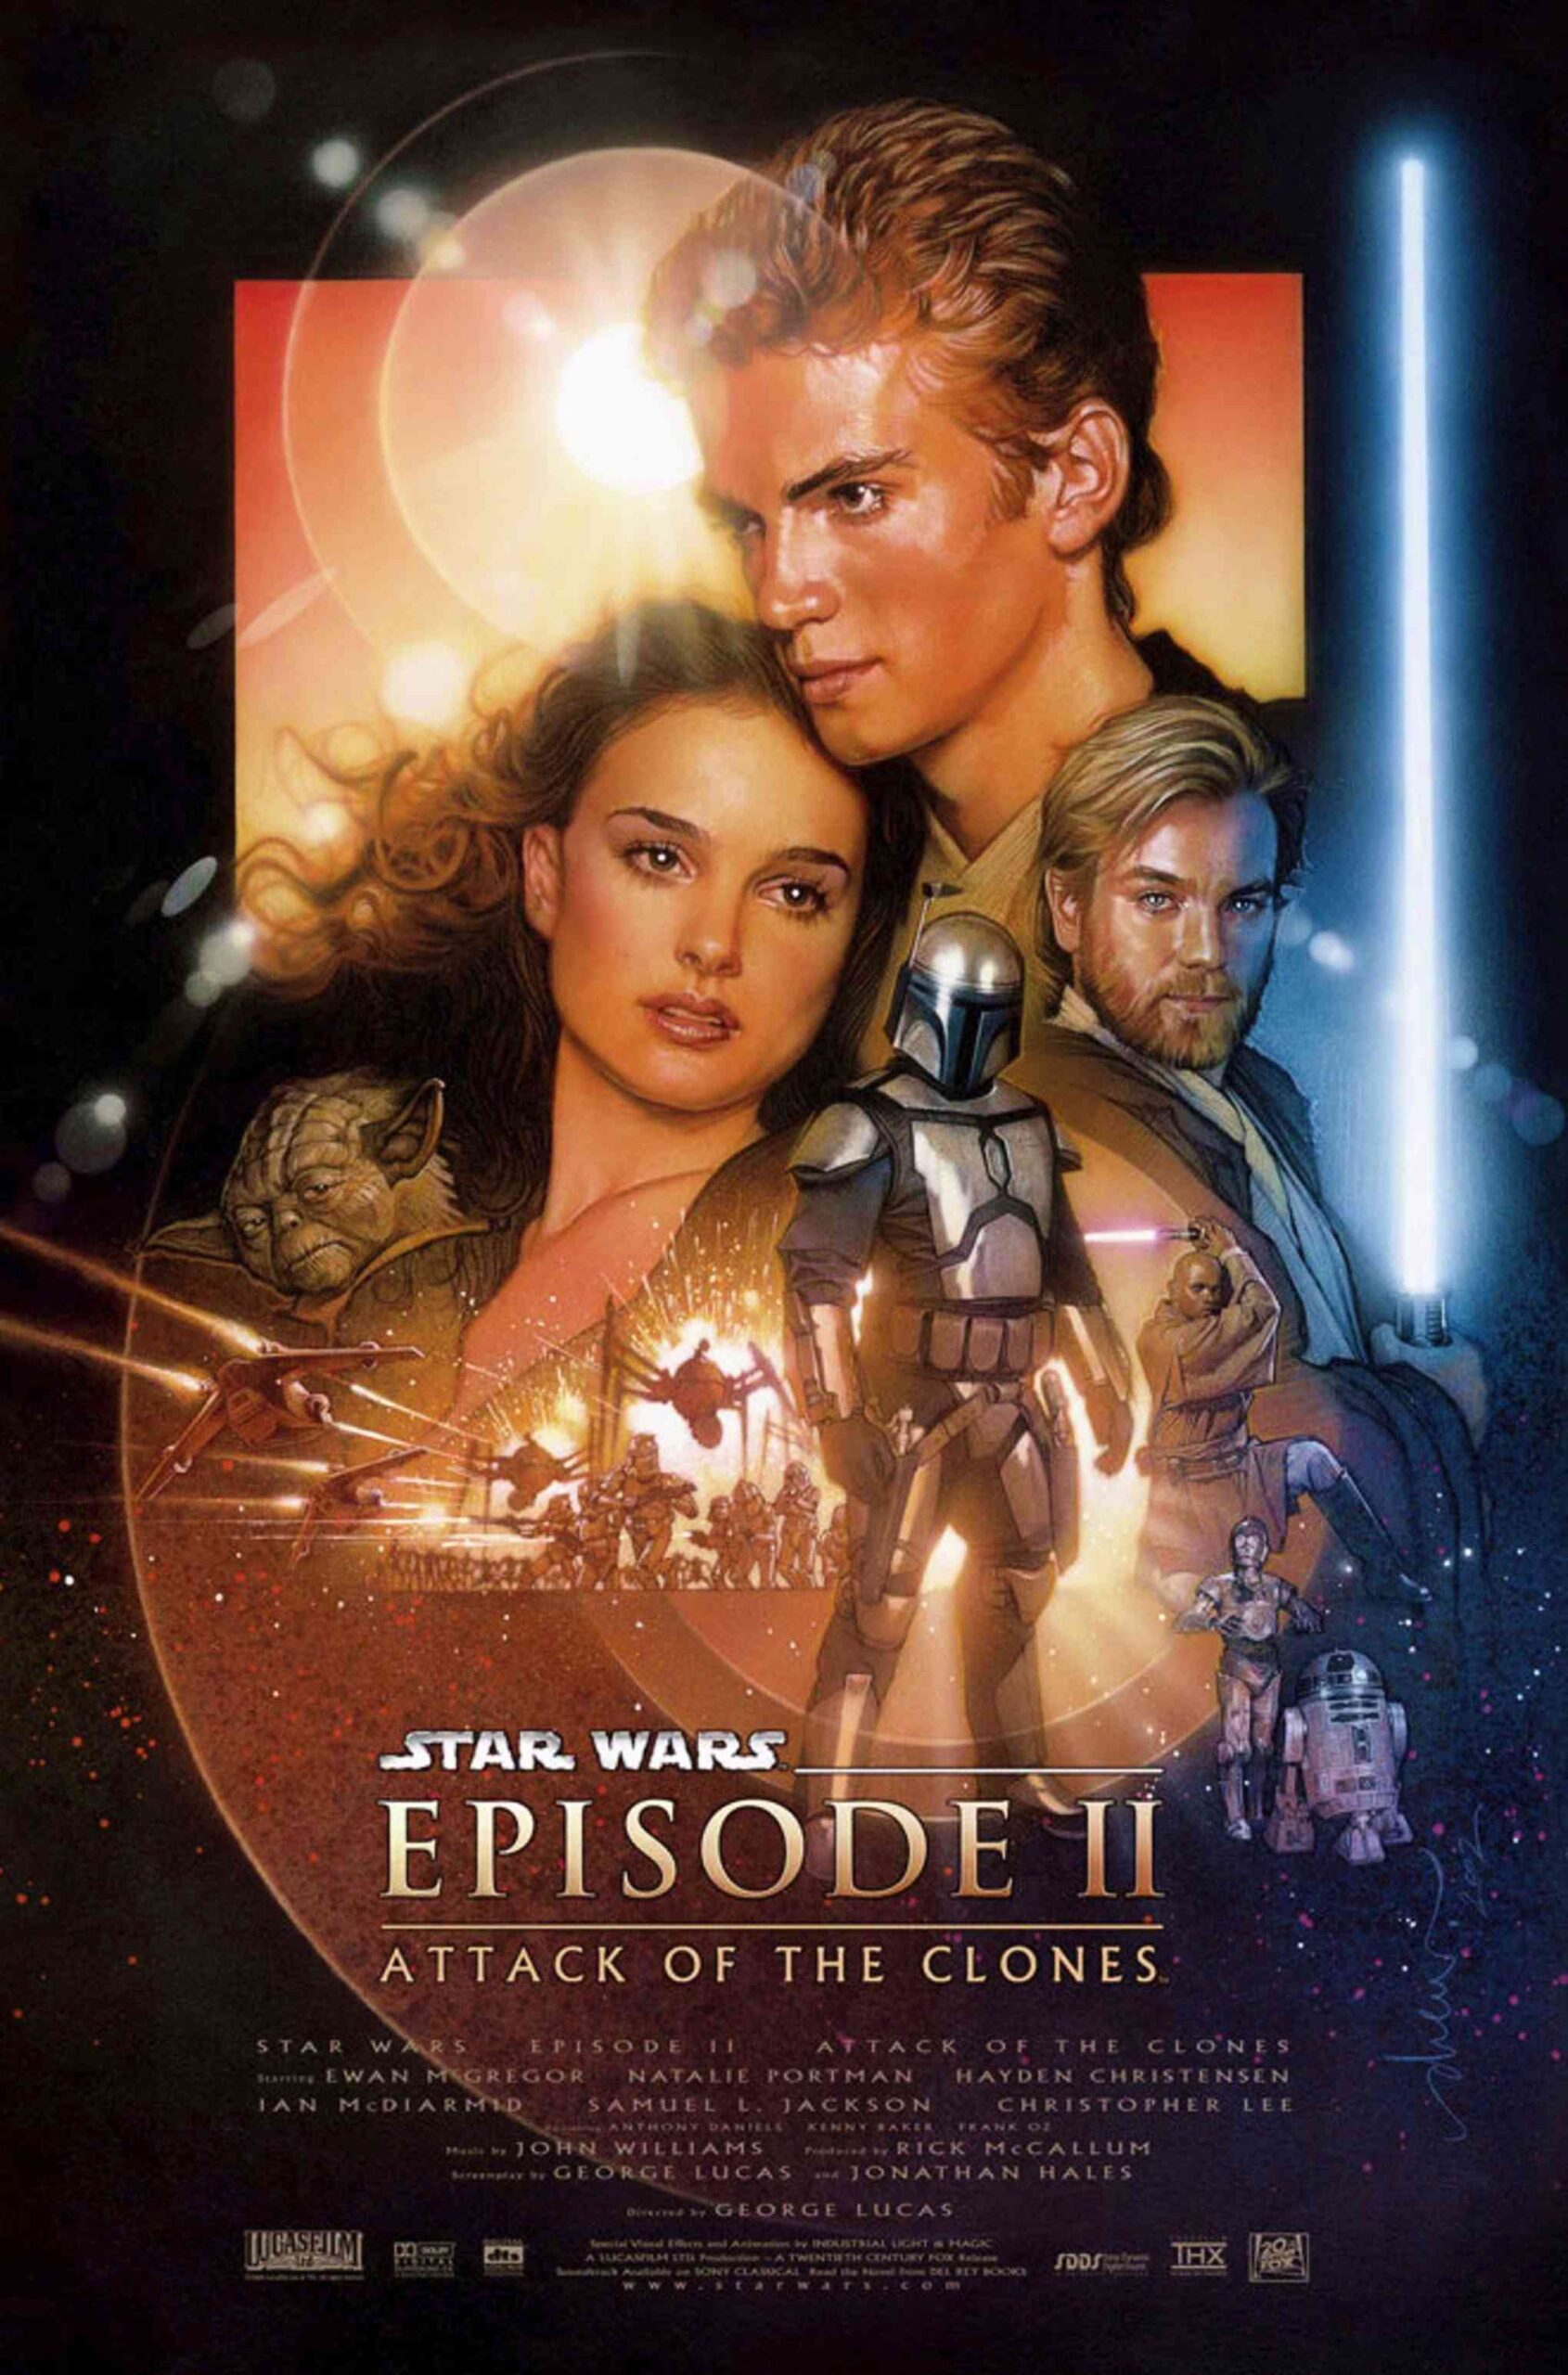 FULL MOVIE: Star Wars: Episode II: Attack of the Clones (2002)